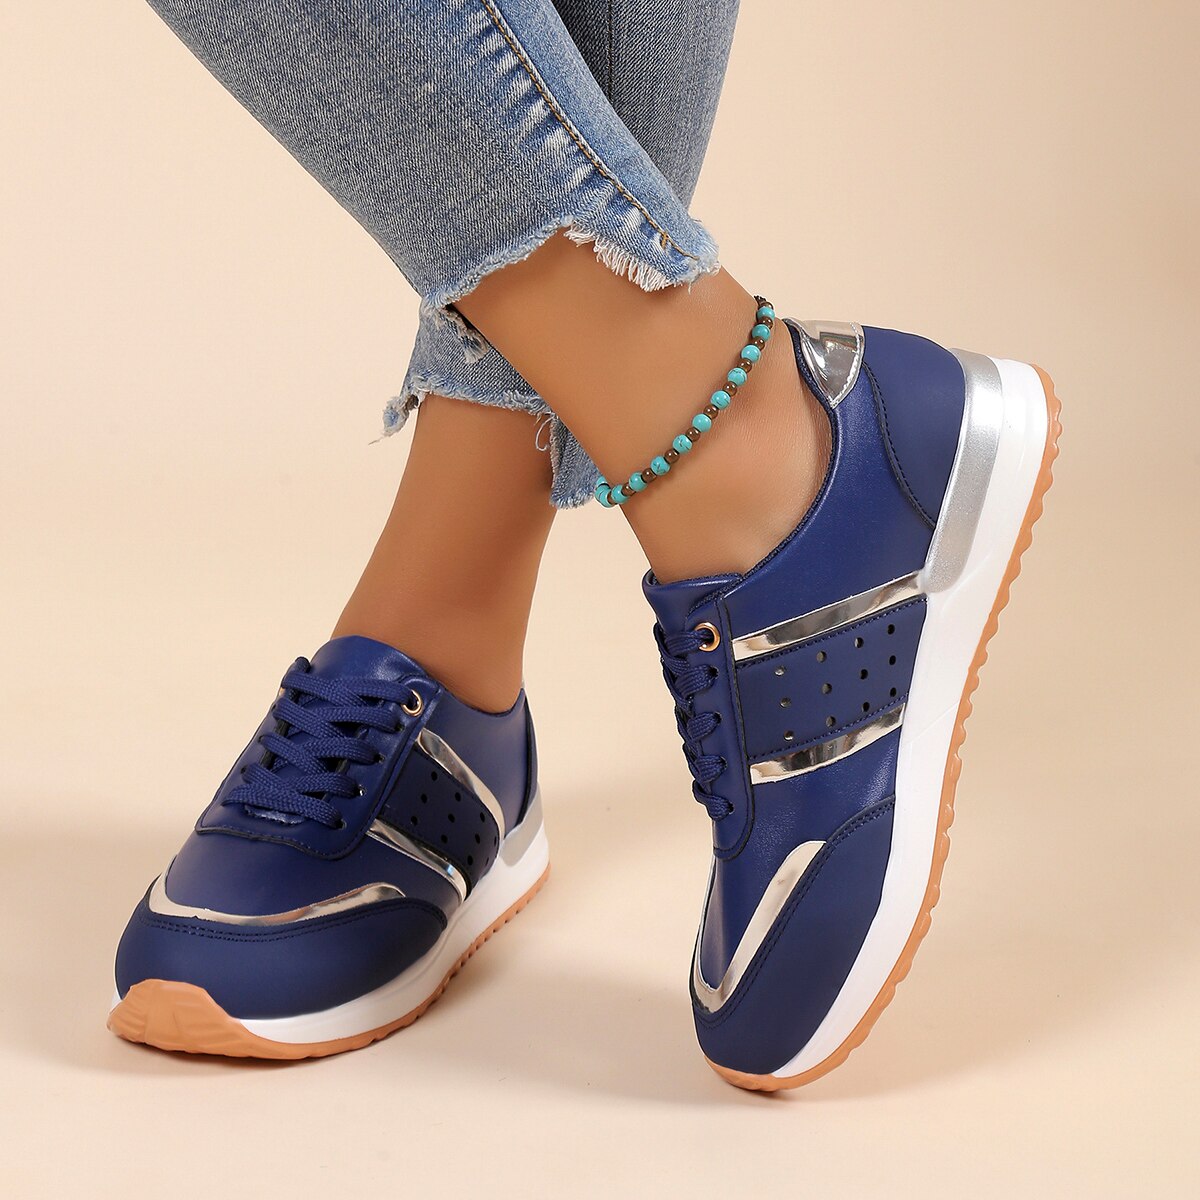 Women Shoes Leather Breathable Comfy Summer Platform Sneakers - Smiths Picks - Orthopedic Shoes & Sandals